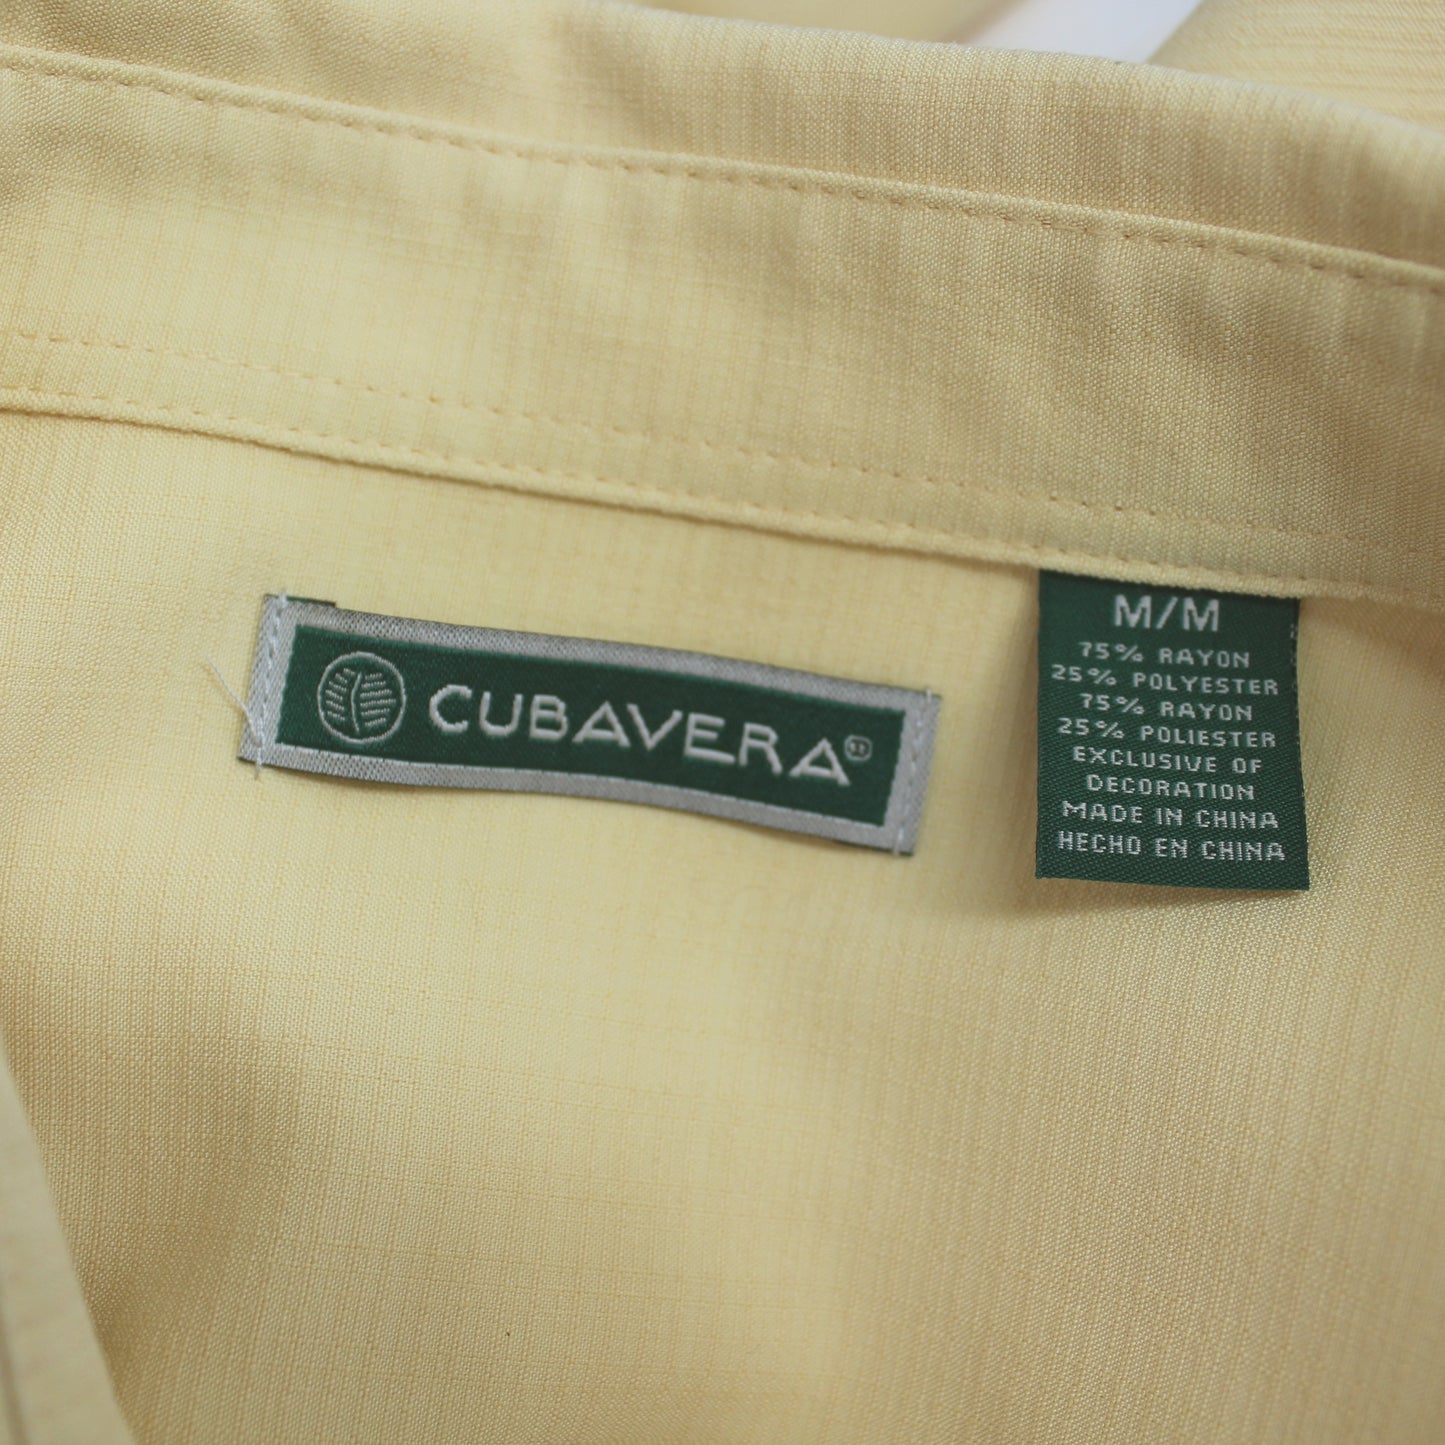 Cubavera Shirt Cream Color Tucked Blue Stitched Front M/M Chest 45" orig tags care and maker